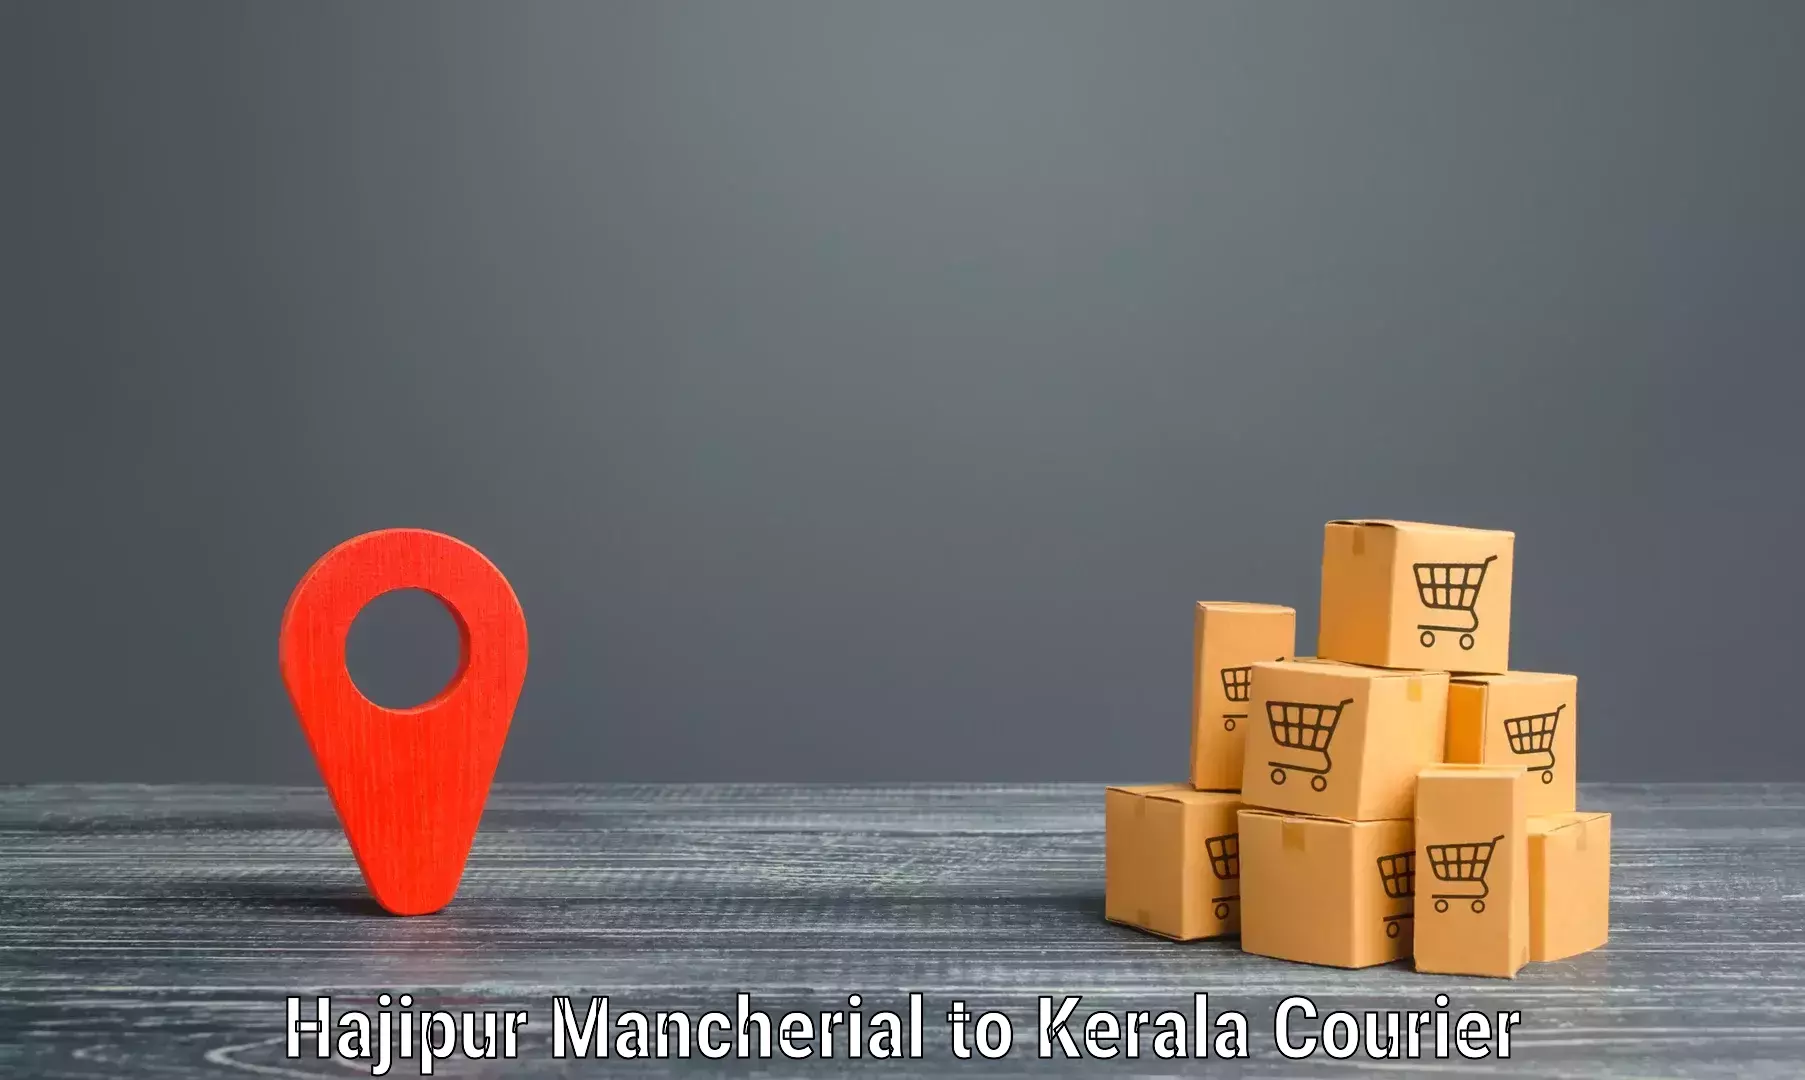 Global shipping networks Hajipur Mancherial to Kilimanoor